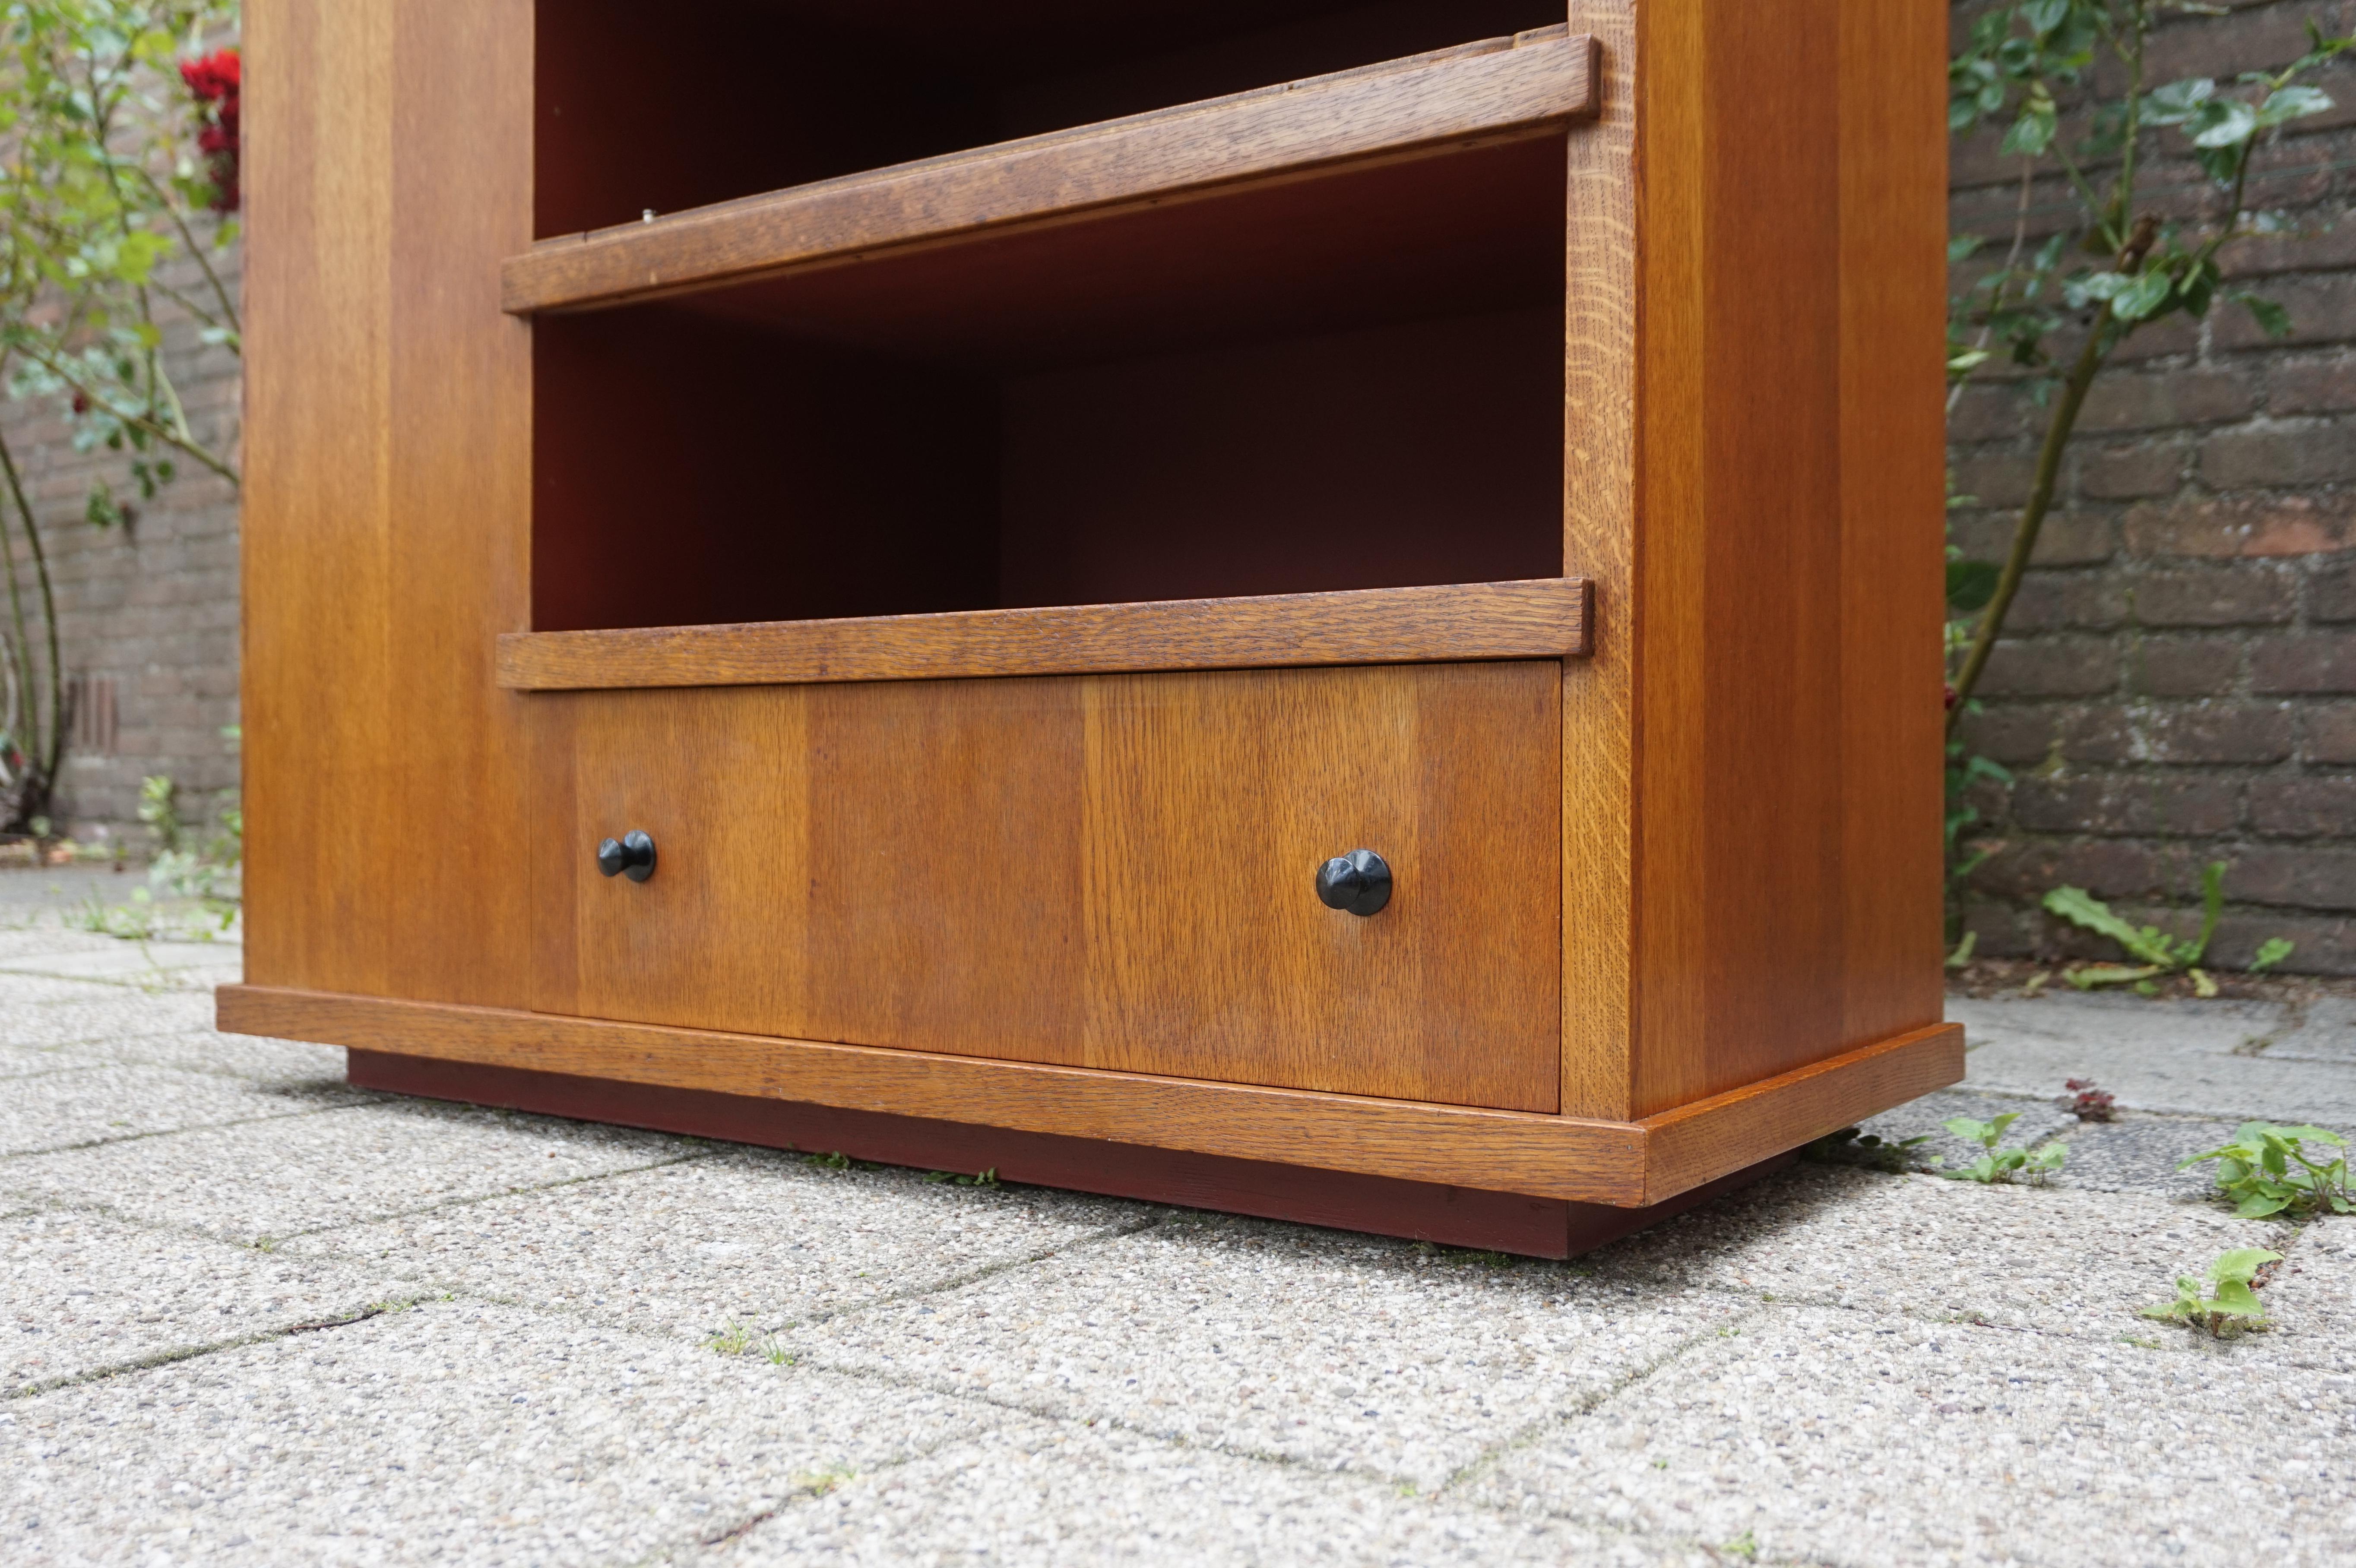 Hand-Crafted Art Deco The Hague School Style Drinks Cabinet / Sideboard / Small Credenza 1920